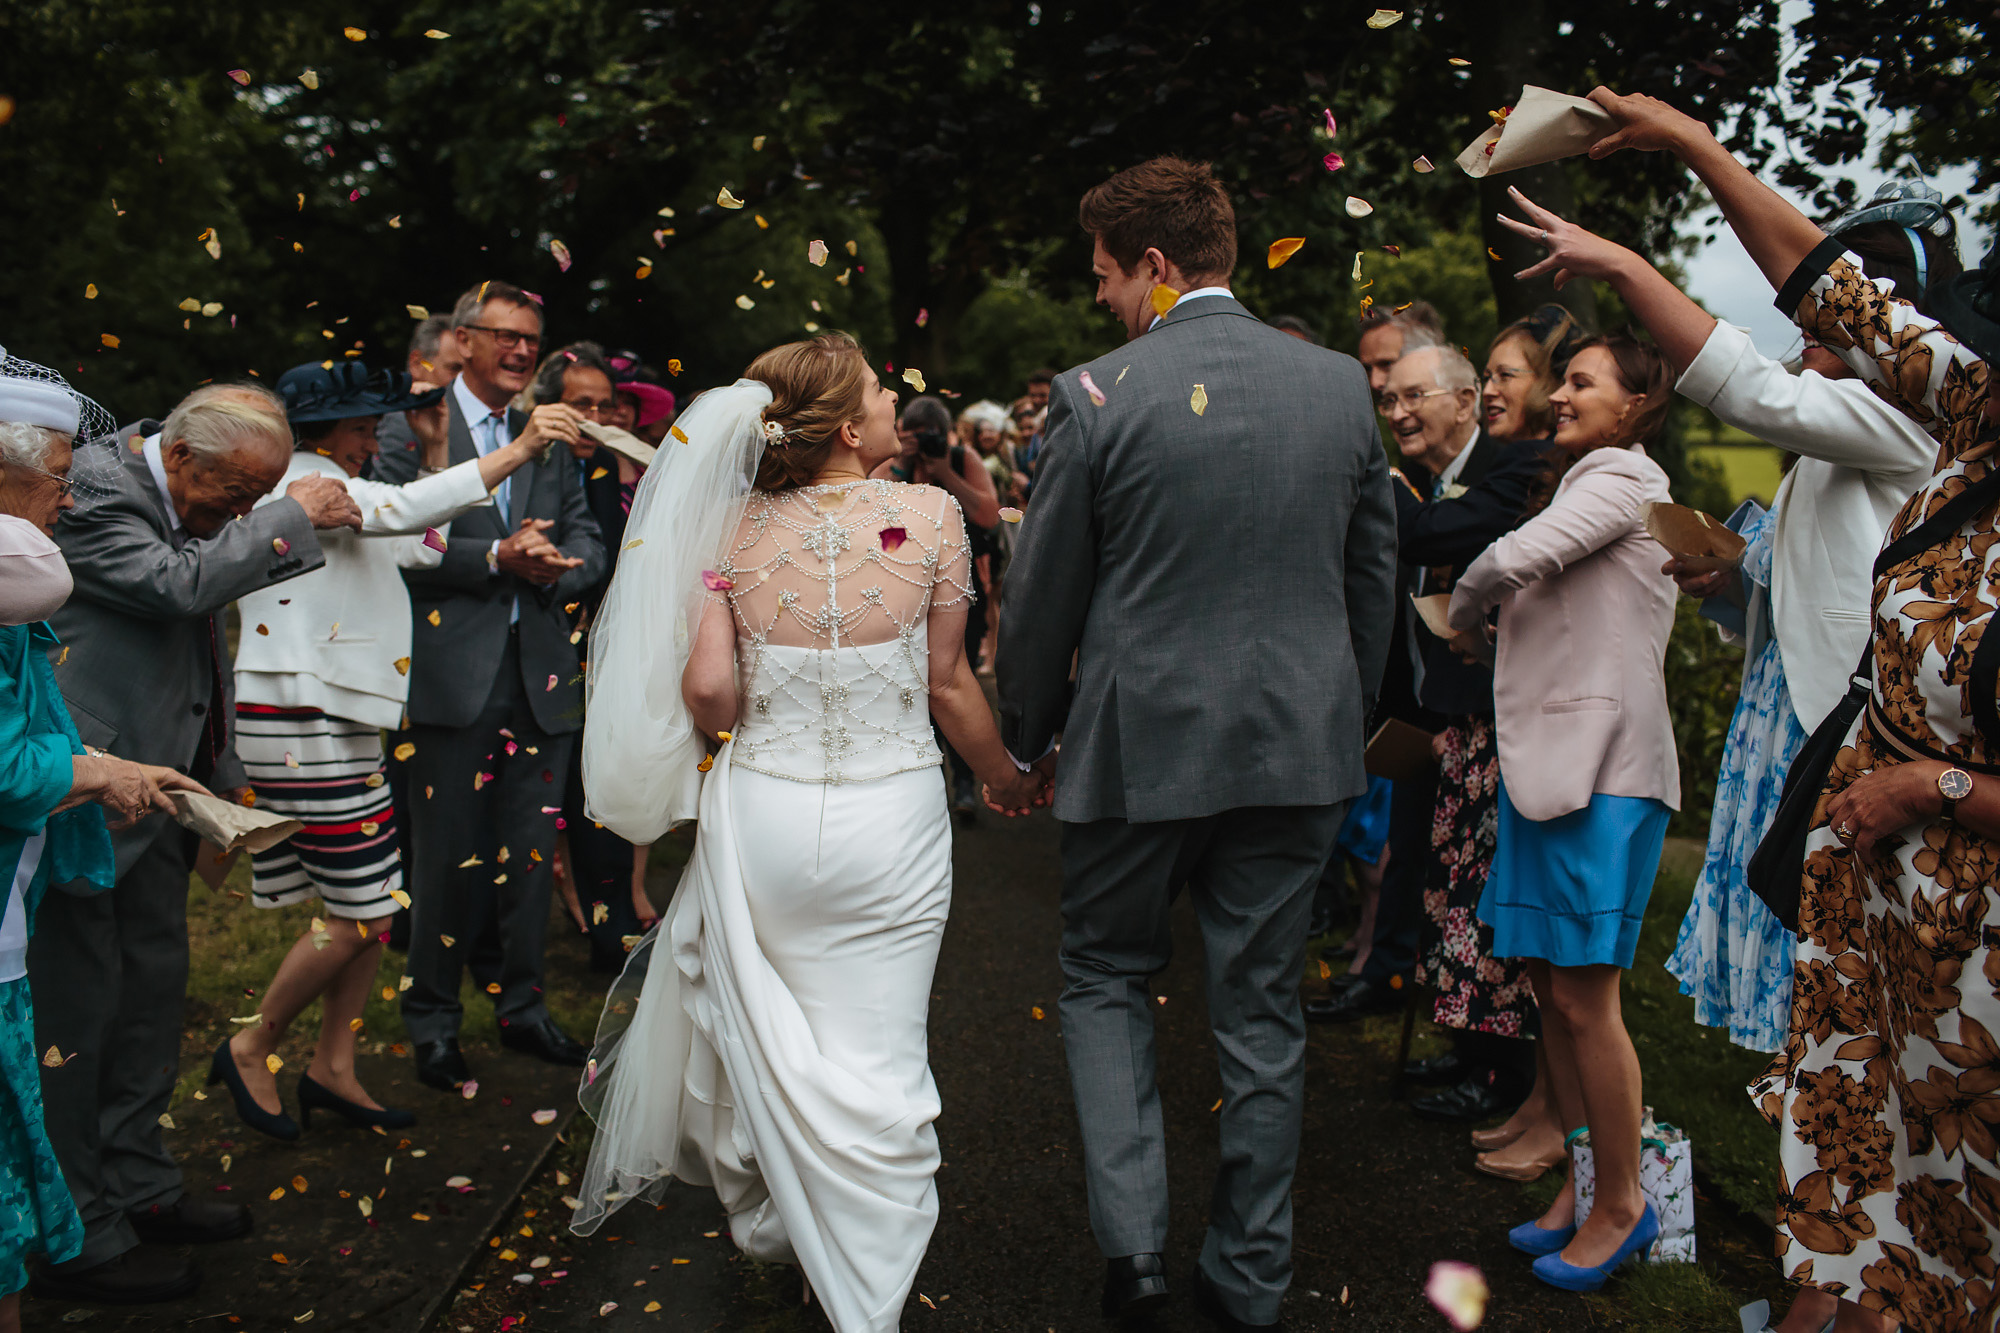 Throwing confetti on the Bride and Groom at a wedding